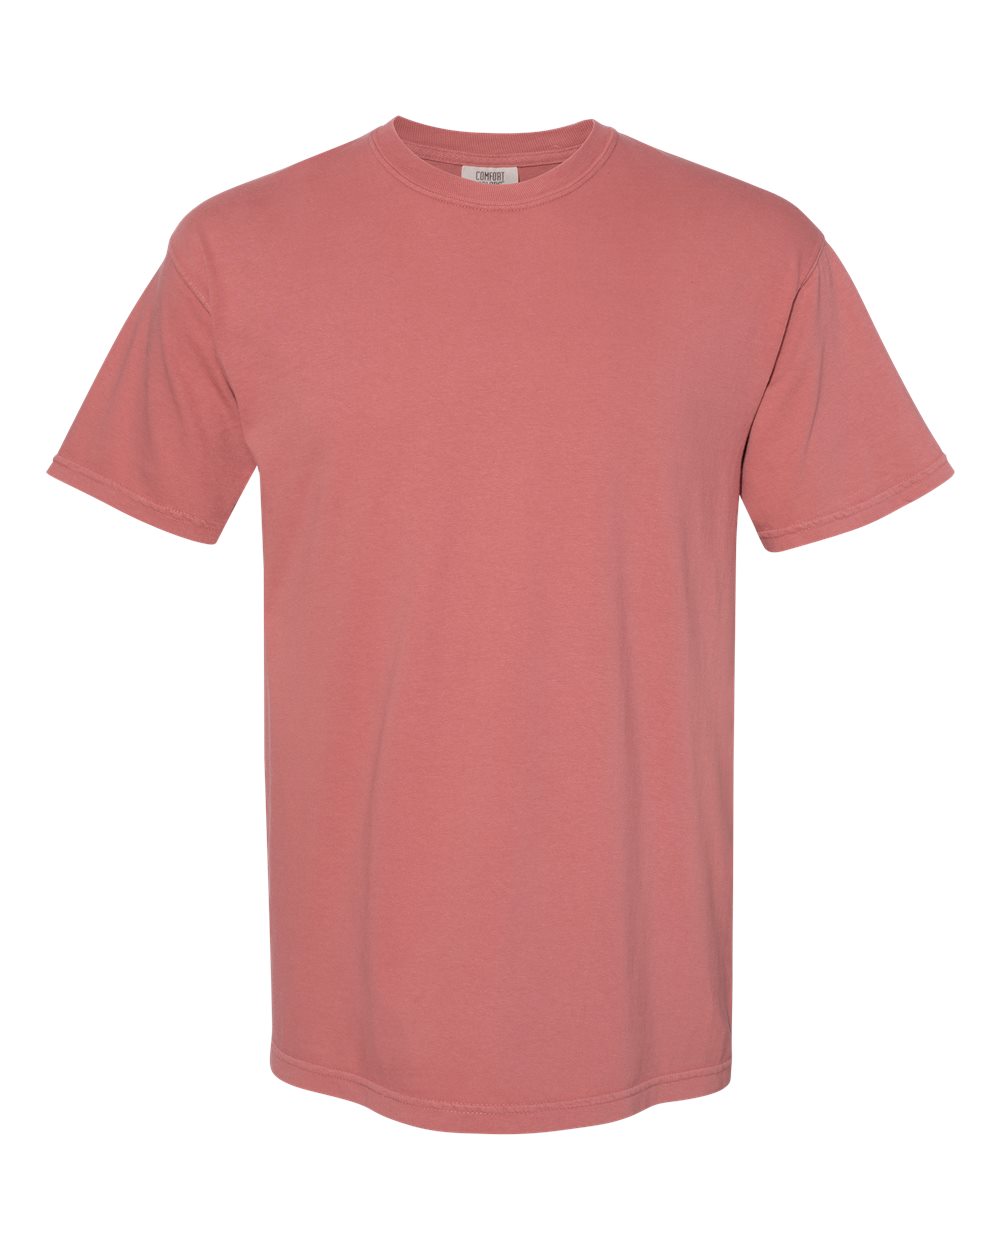 Comfort Colors Garment-Dyed Tee (1717) in Cumin